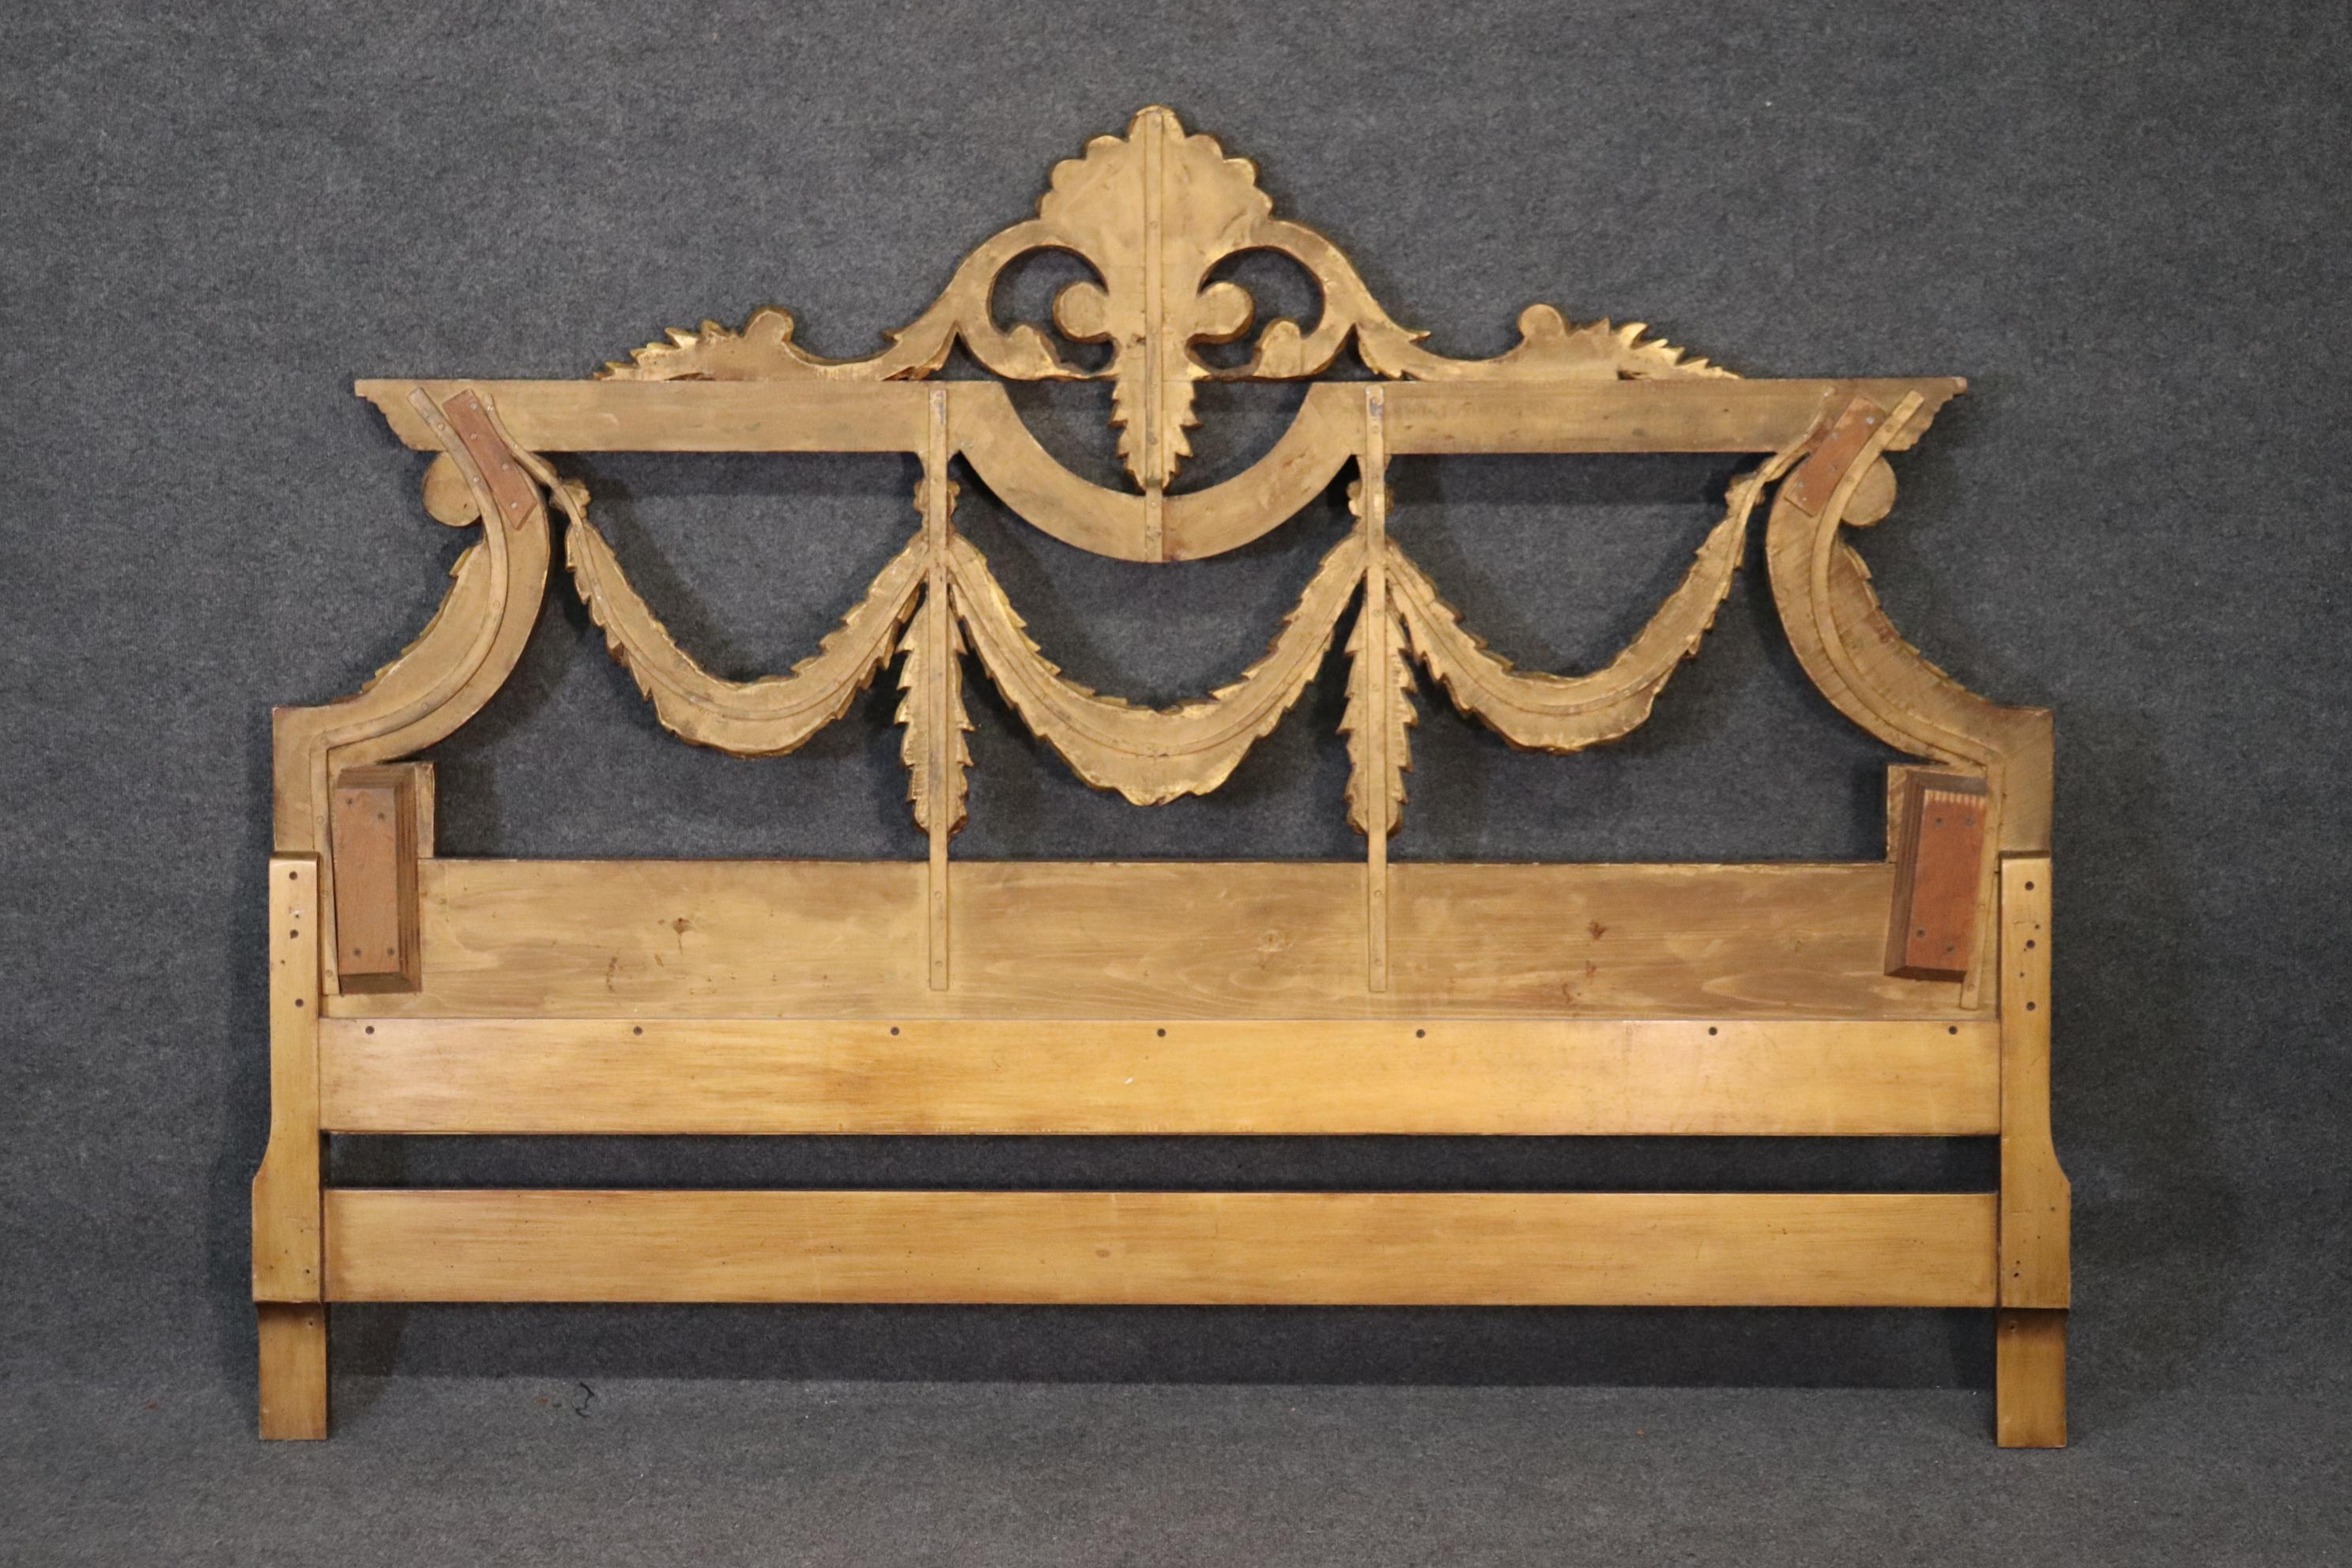 Neoclassical Revival Italian Neoclassical Gold Leaf Gilded King Size Headboard Bed, circa 1950